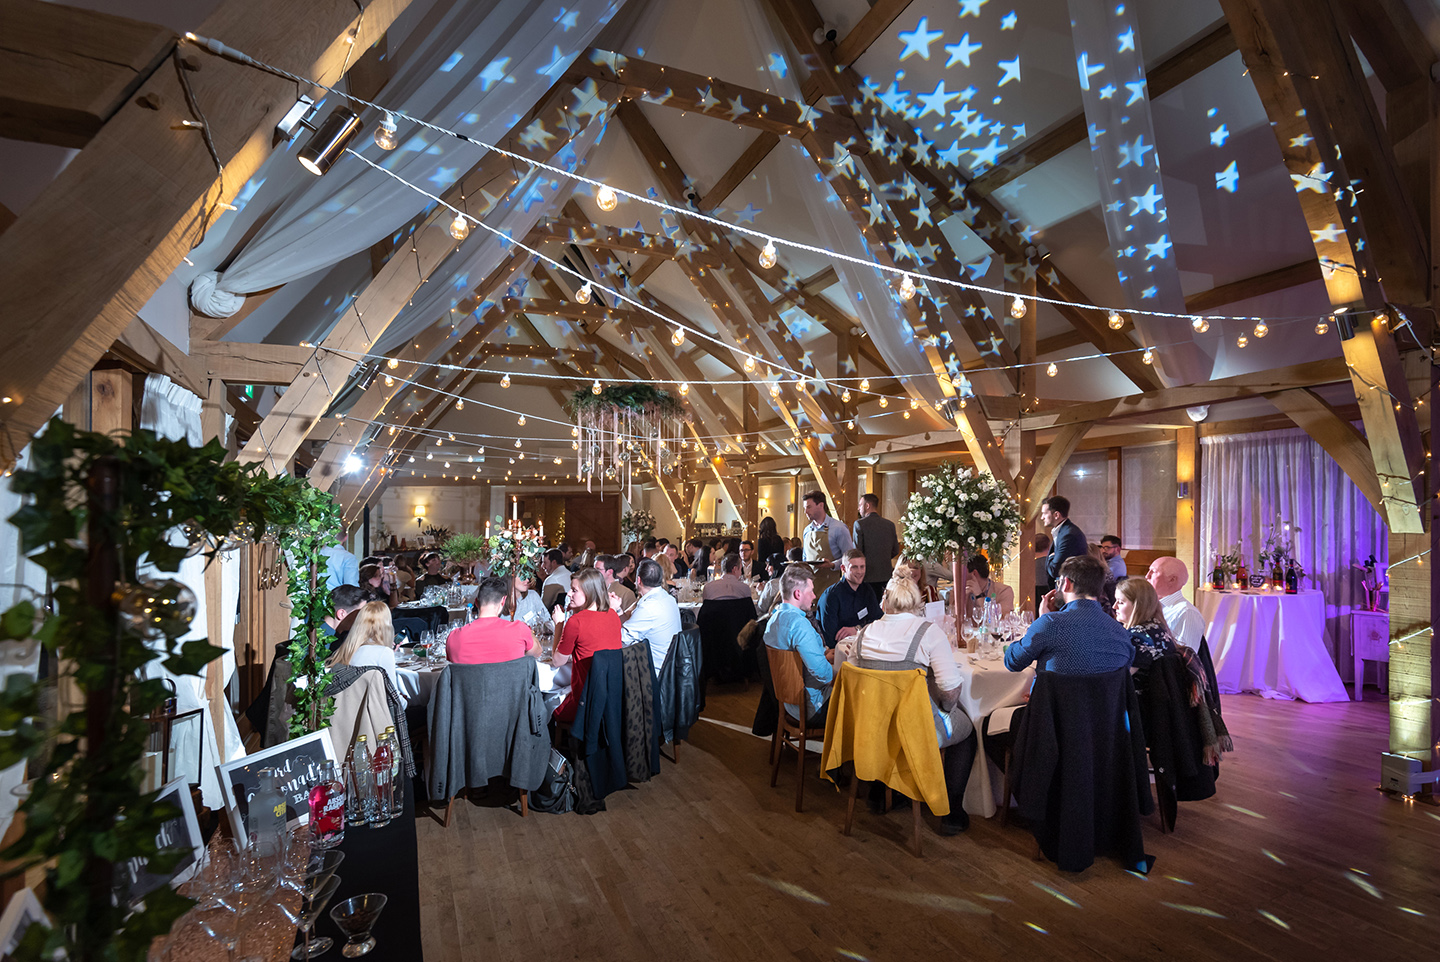 Wedding couples share their excitement and wedding ideas in the Bridge Barn during their tasting event at Bassmead Manor Barns